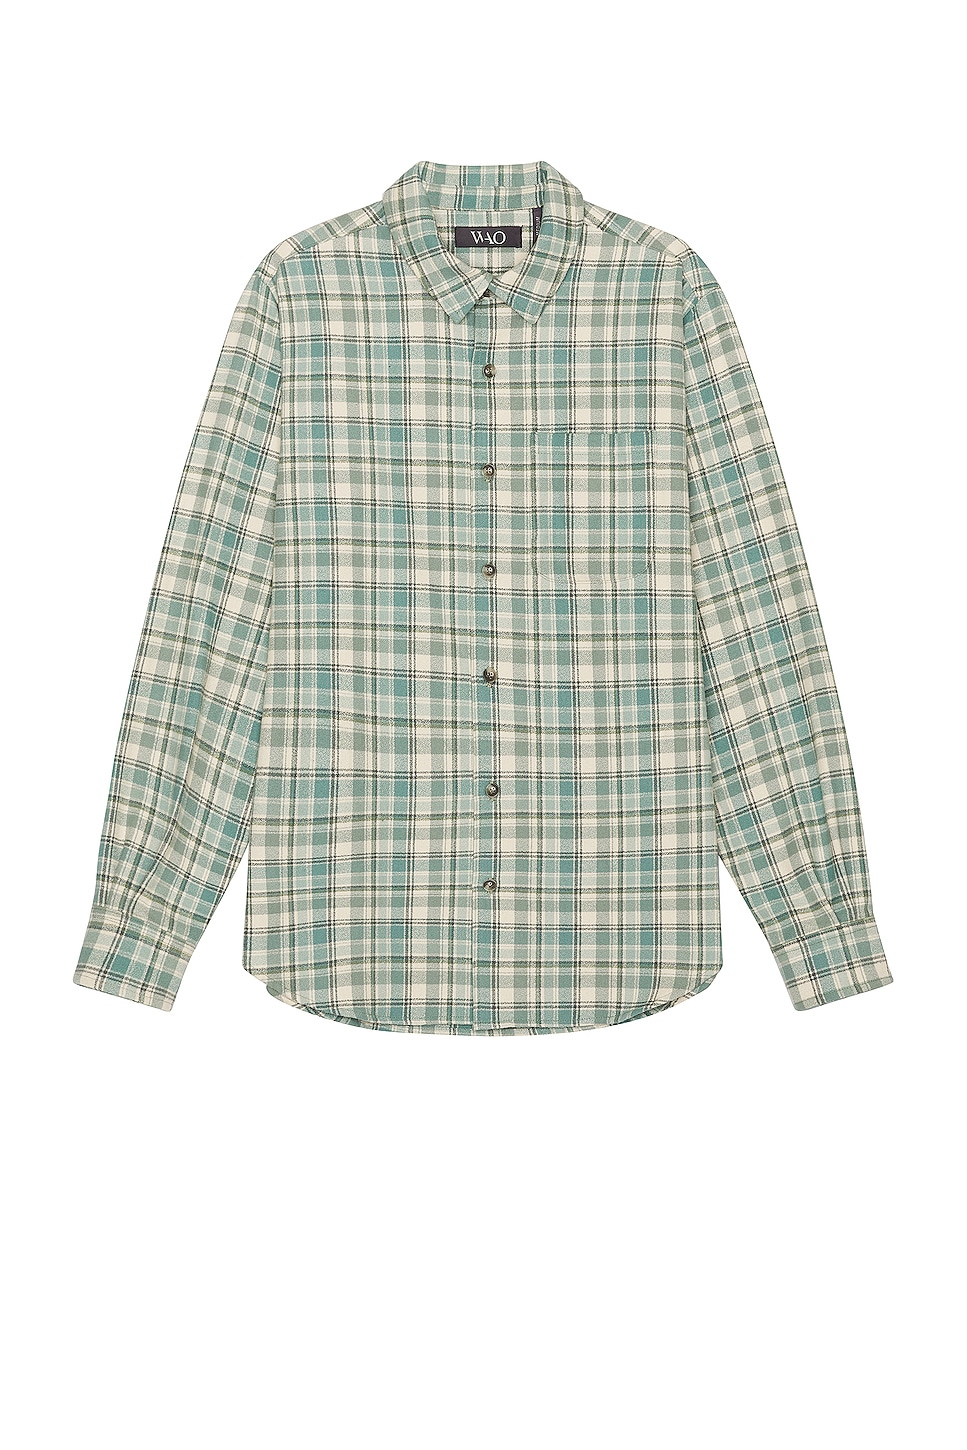 Image 1 of WAO The Flannel Shirt in blue & cream